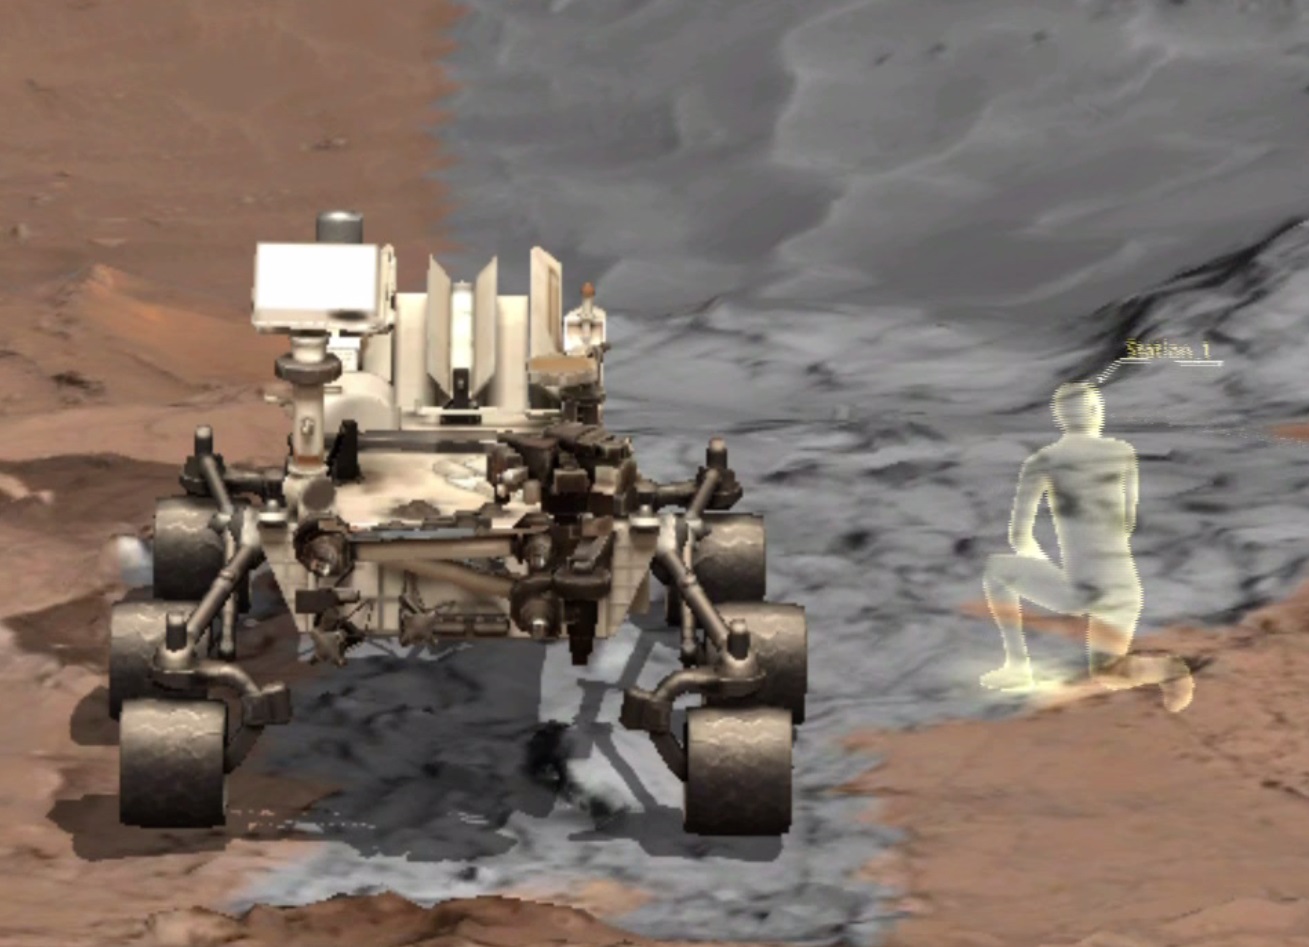 We Took A Virtual Walk On The Martian Surface